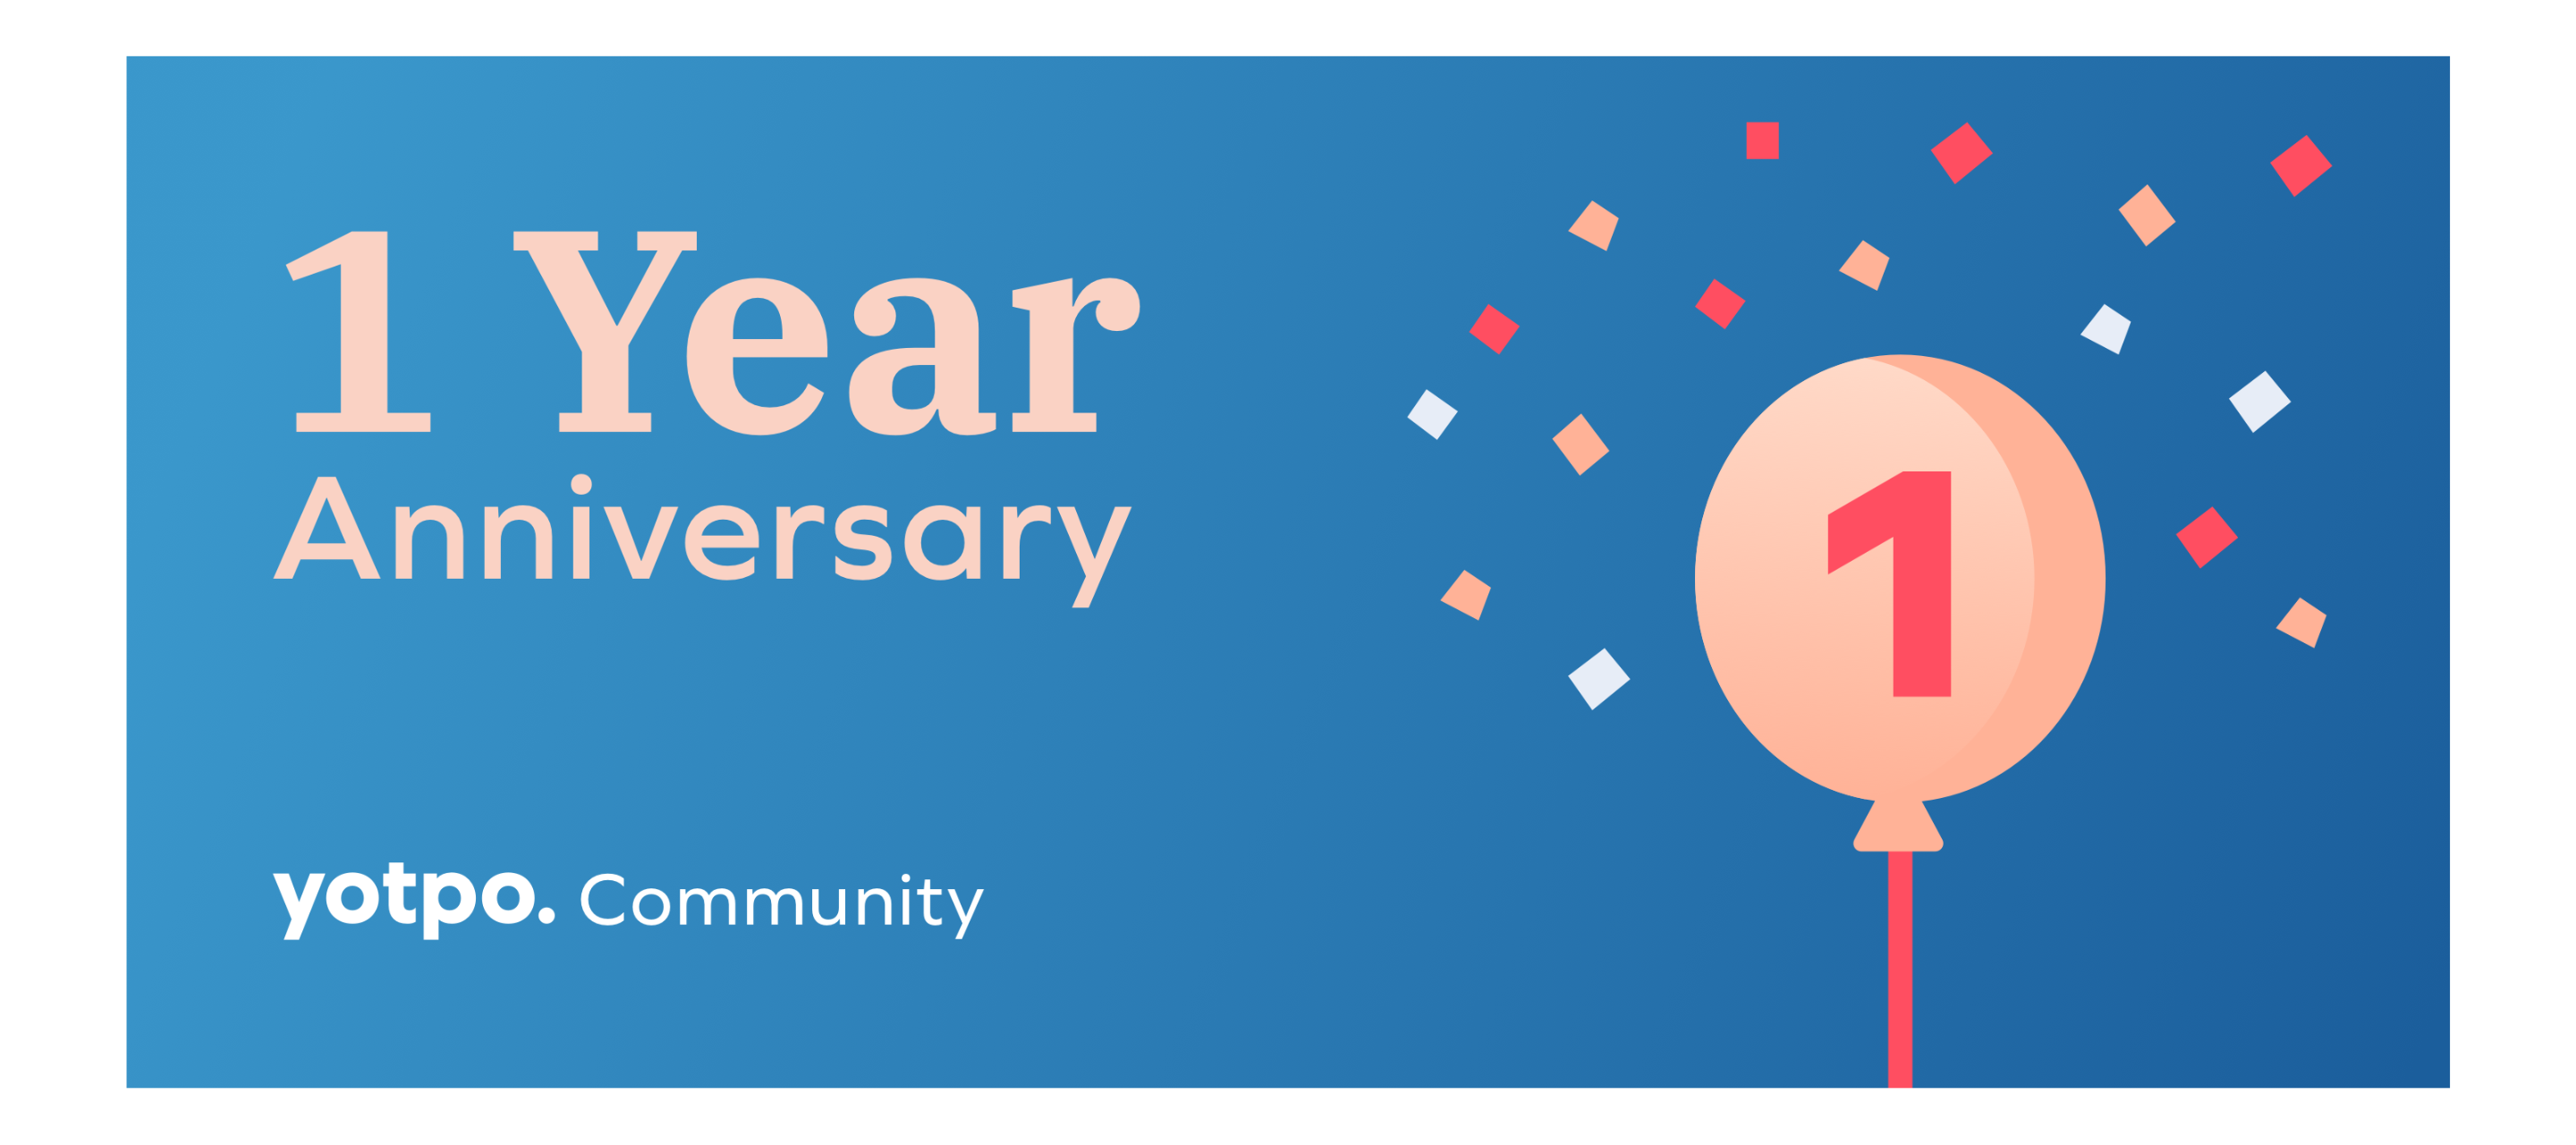 It’s been a year since we launched the Yotpo Community! 🎉🎉🎉